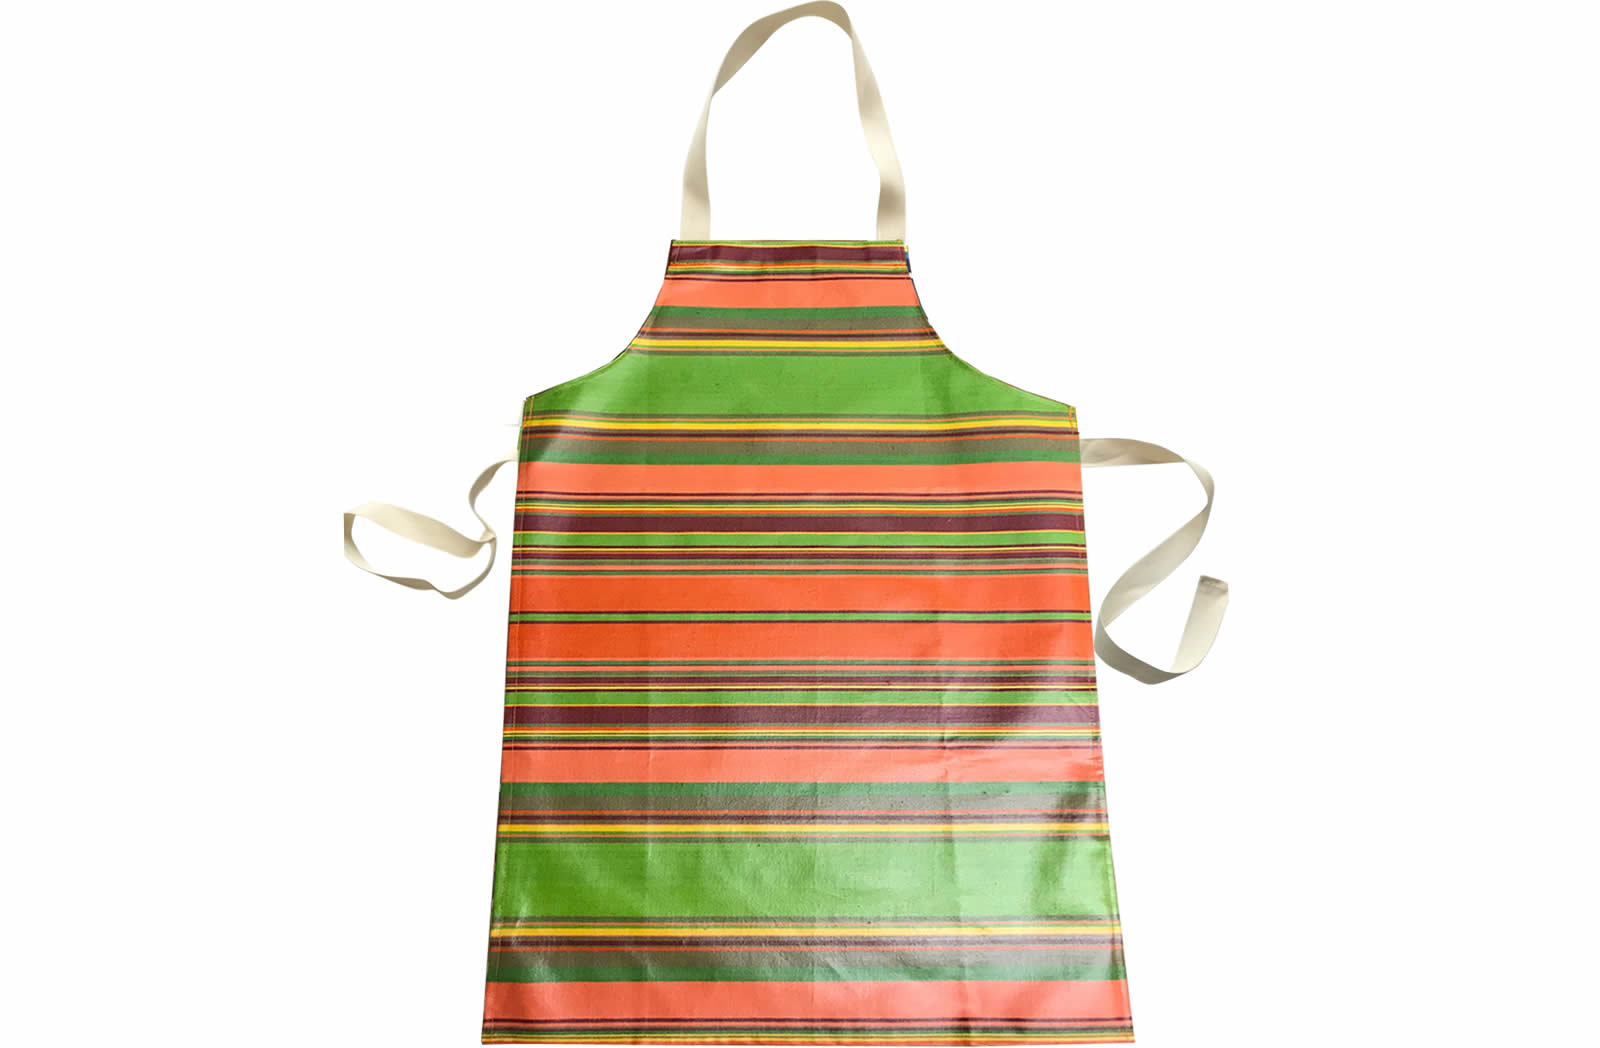 Coral Striped PVC Kids Aprons | Oilcloth Aprons for Children Coral  Bright Green  Terracotta  Stripes